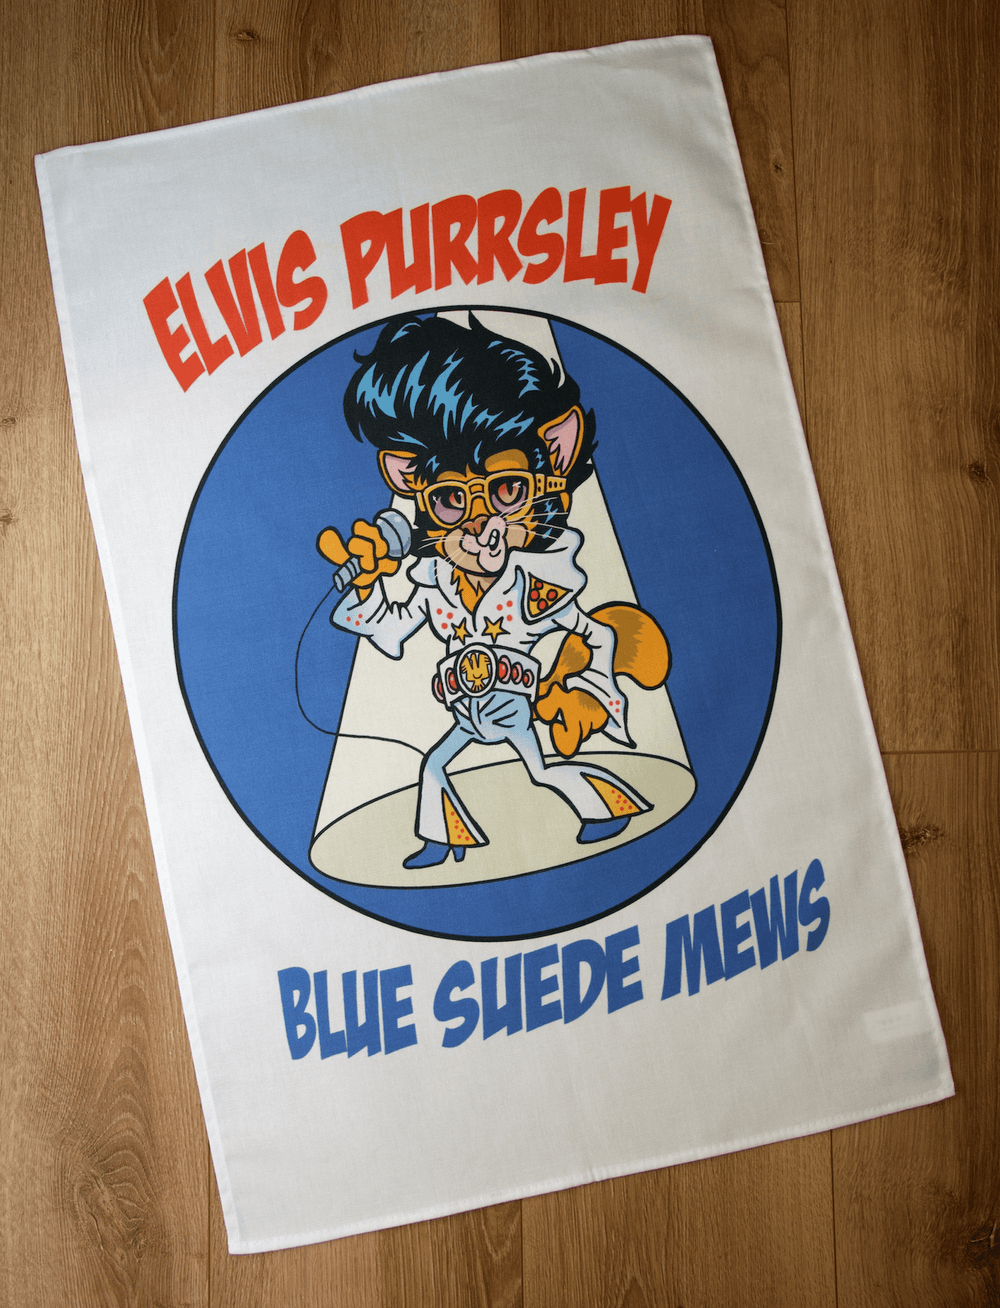 Elvis Purrsley Cat Greeting Card and Matching Tea Towel - Gift Set